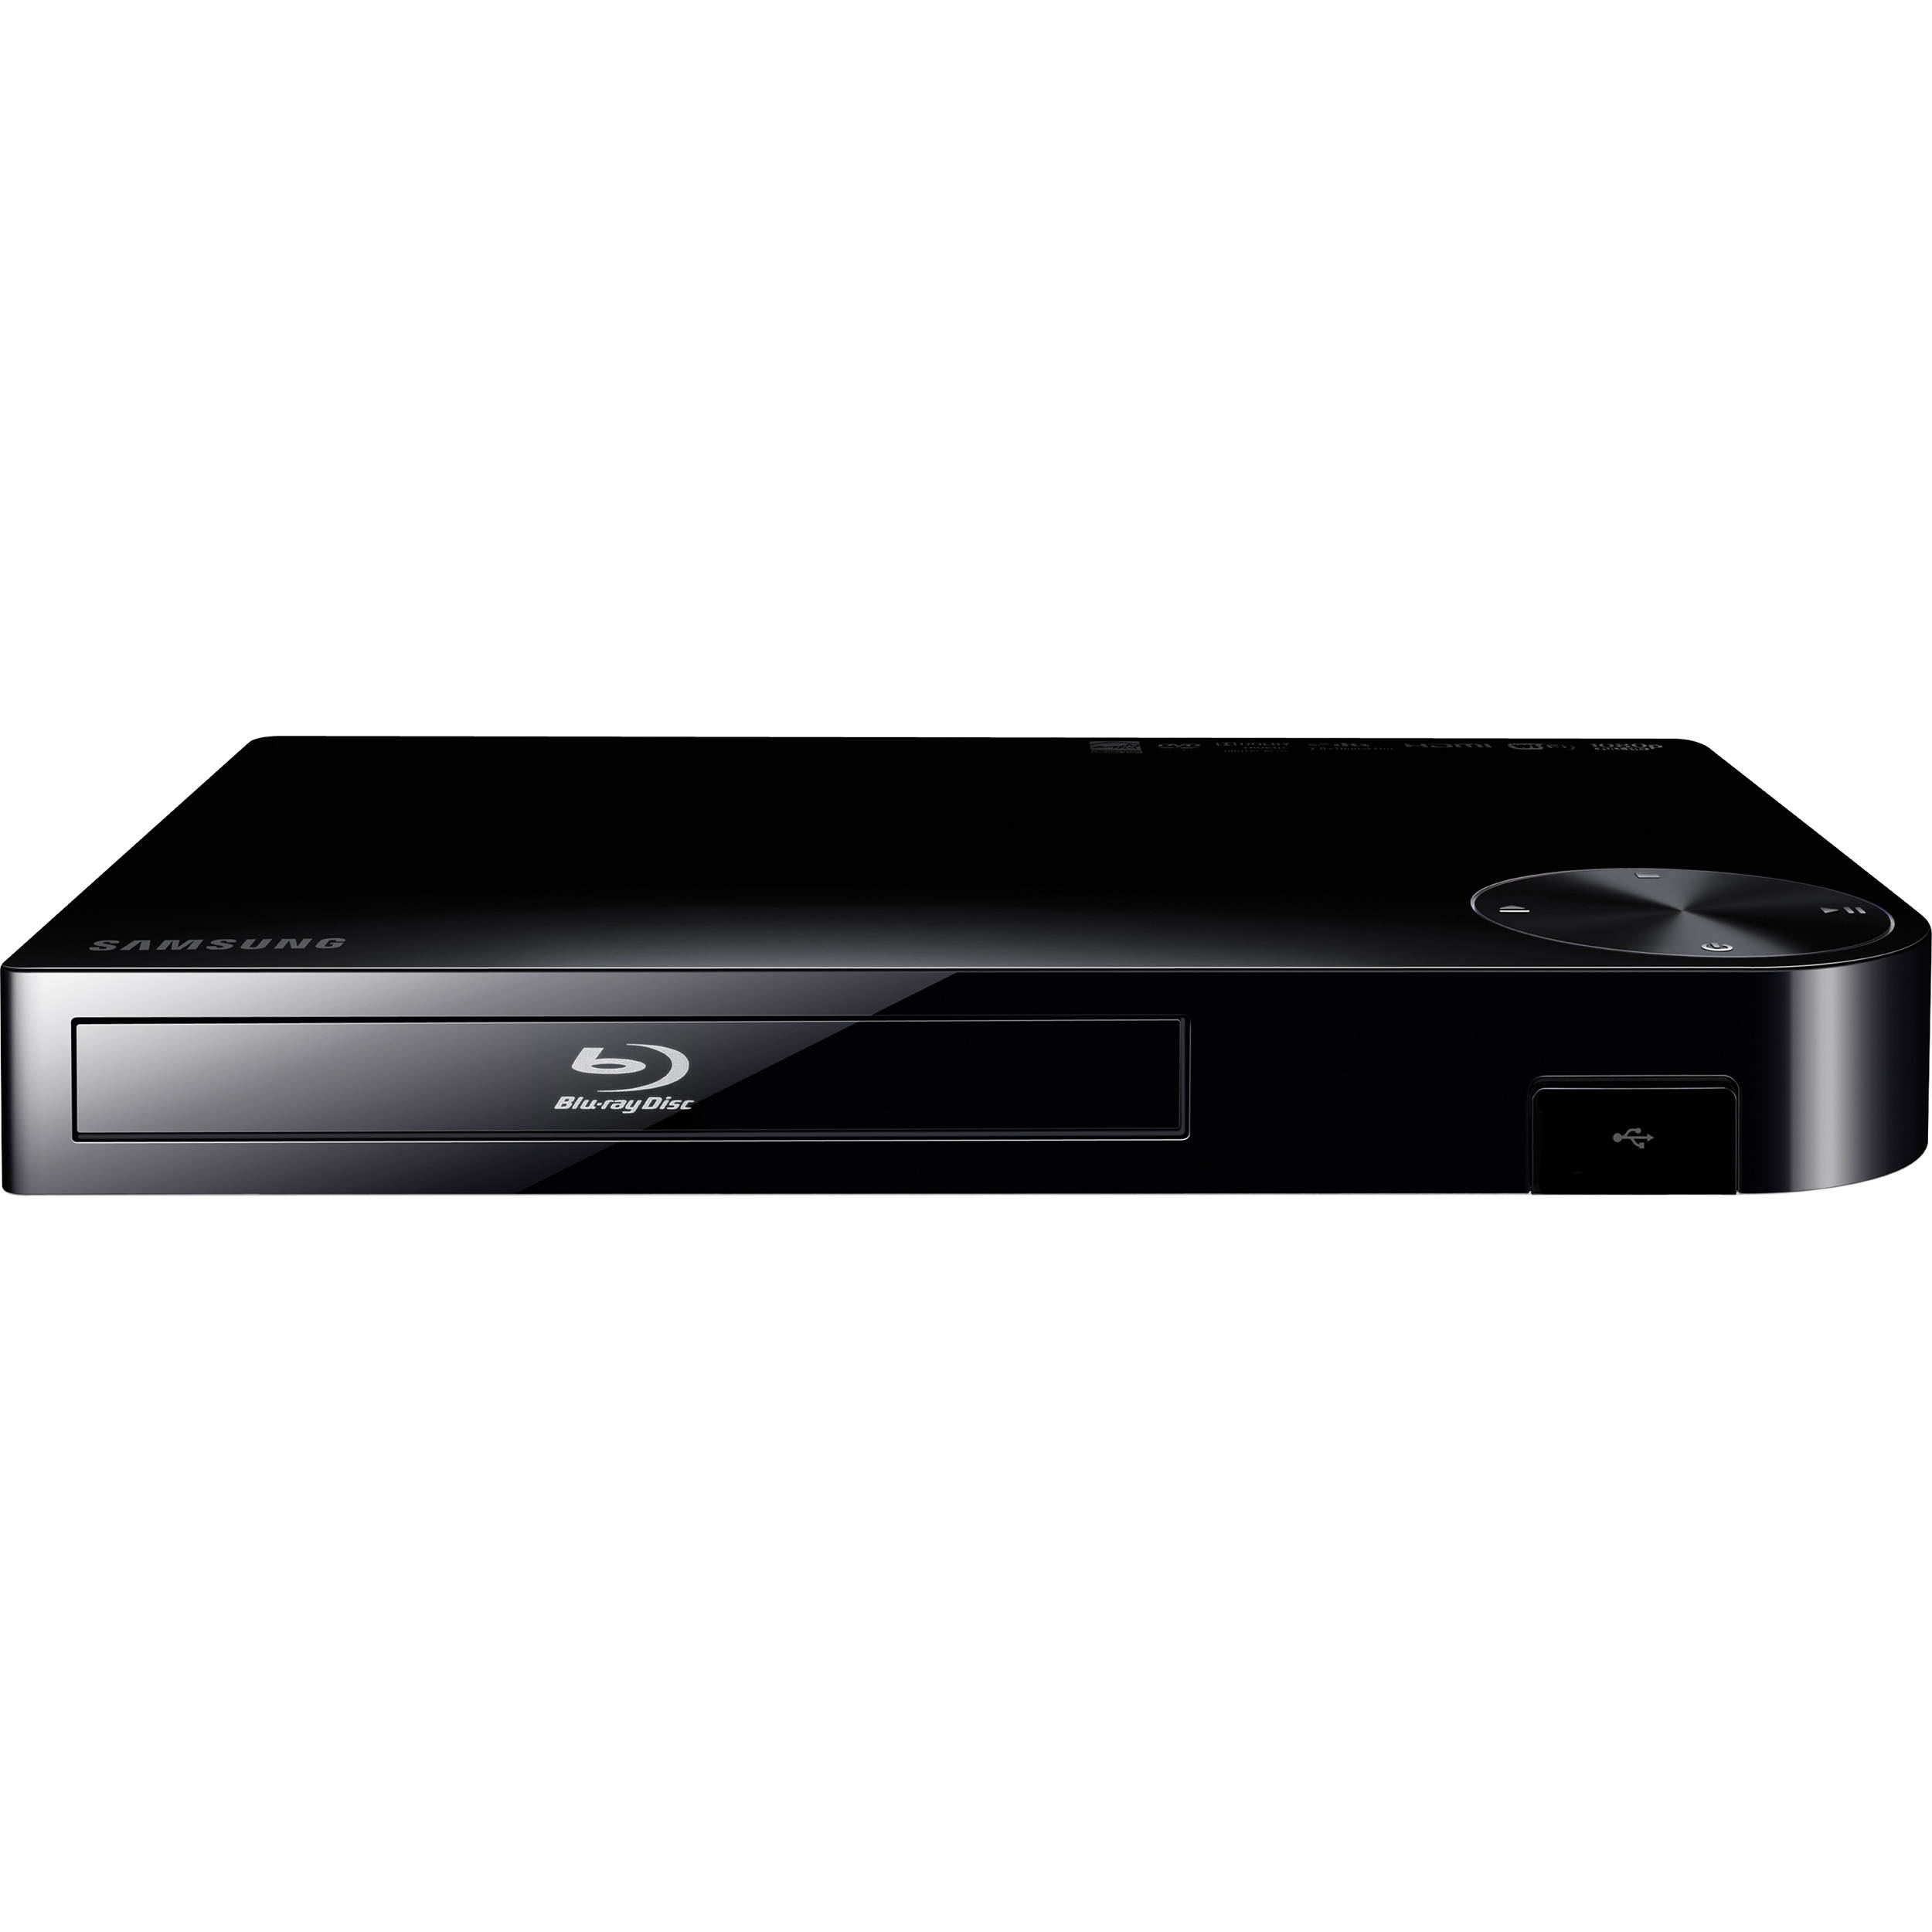 How to reset samsung blu ray player bd-e5400